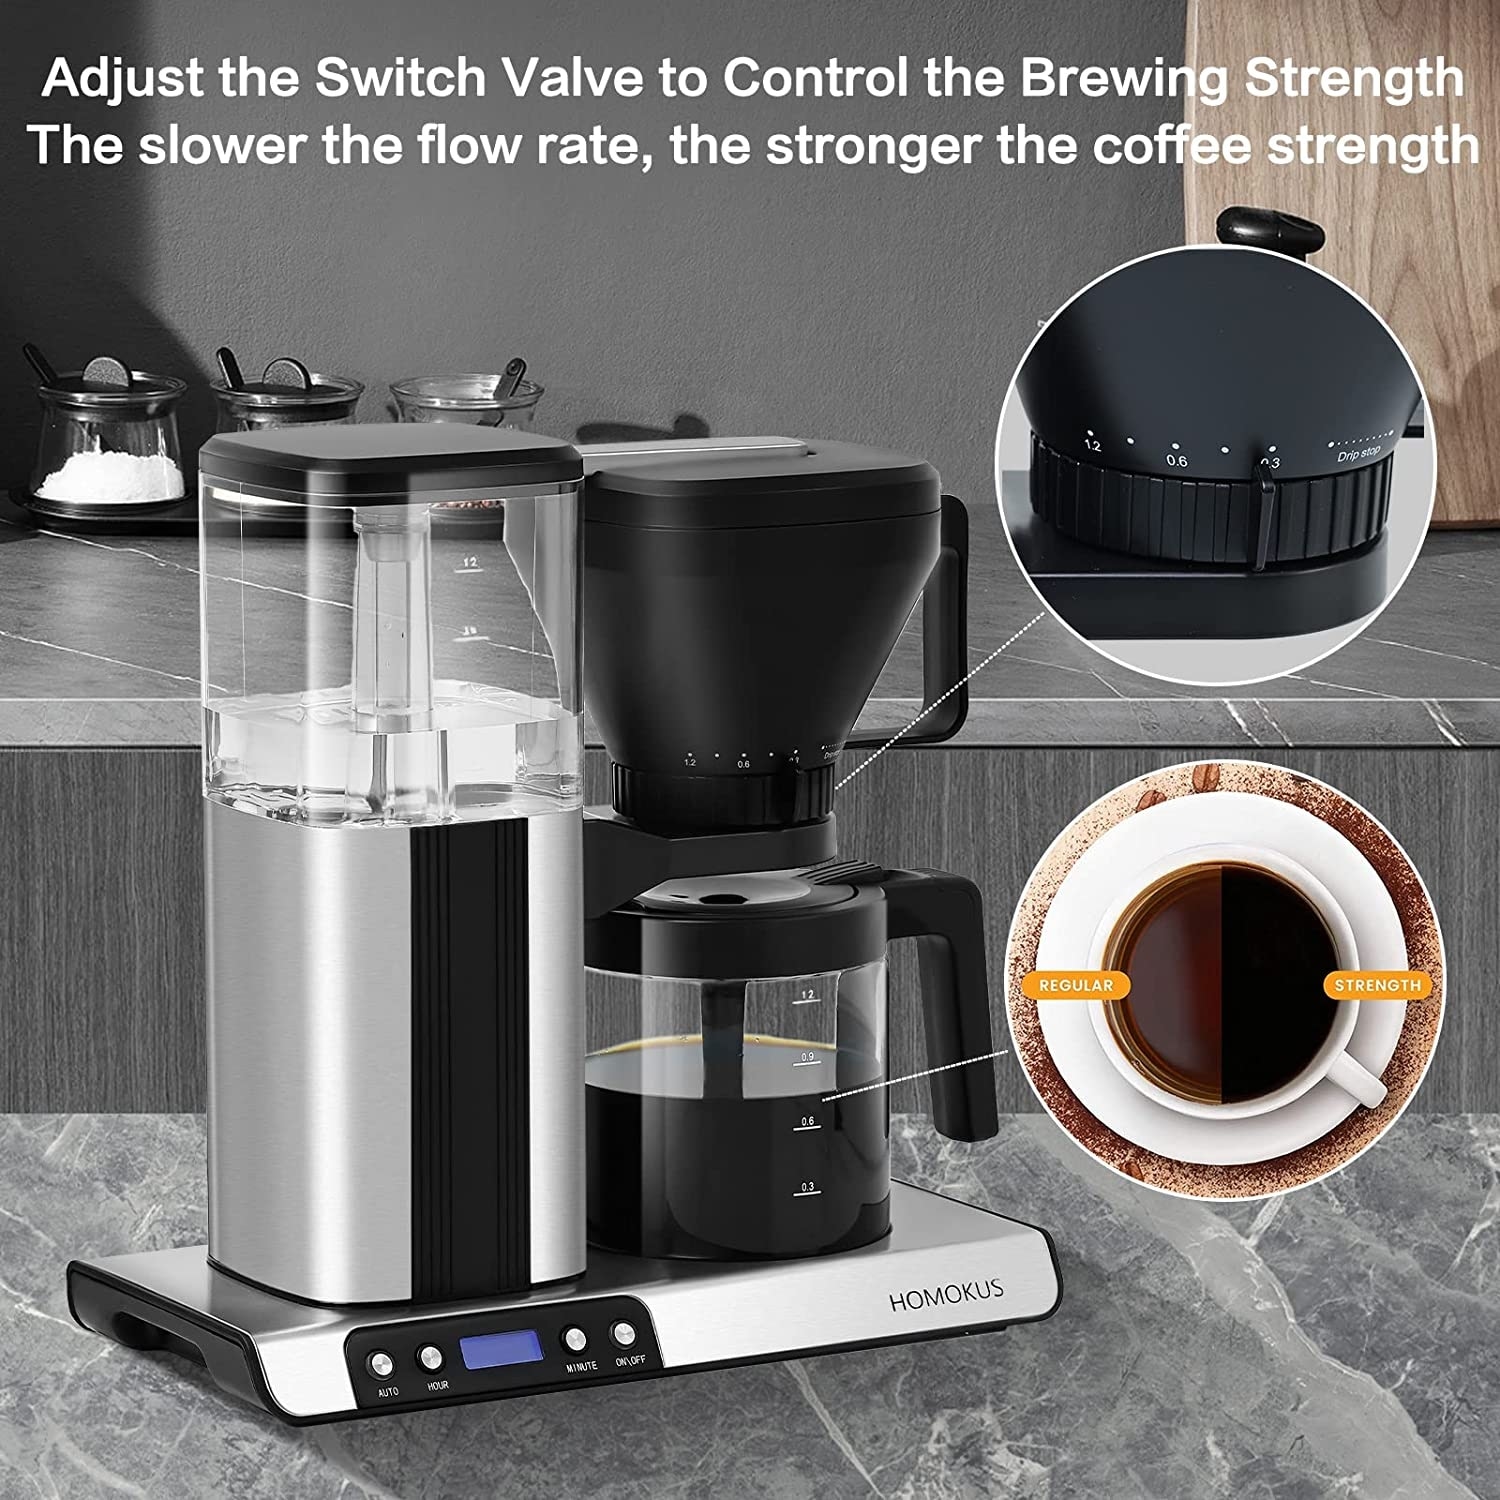 https://ak1.ostkcdn.com/images/products/is/images/direct/a6c121c02cc80fe1d7850779d6926a66b726f78a/8-Cup-Drip-Coffee-Maker---Stainless-Steel-Coffee-Maker---Programmable-Coffee-Maker-with-Timer.jpg